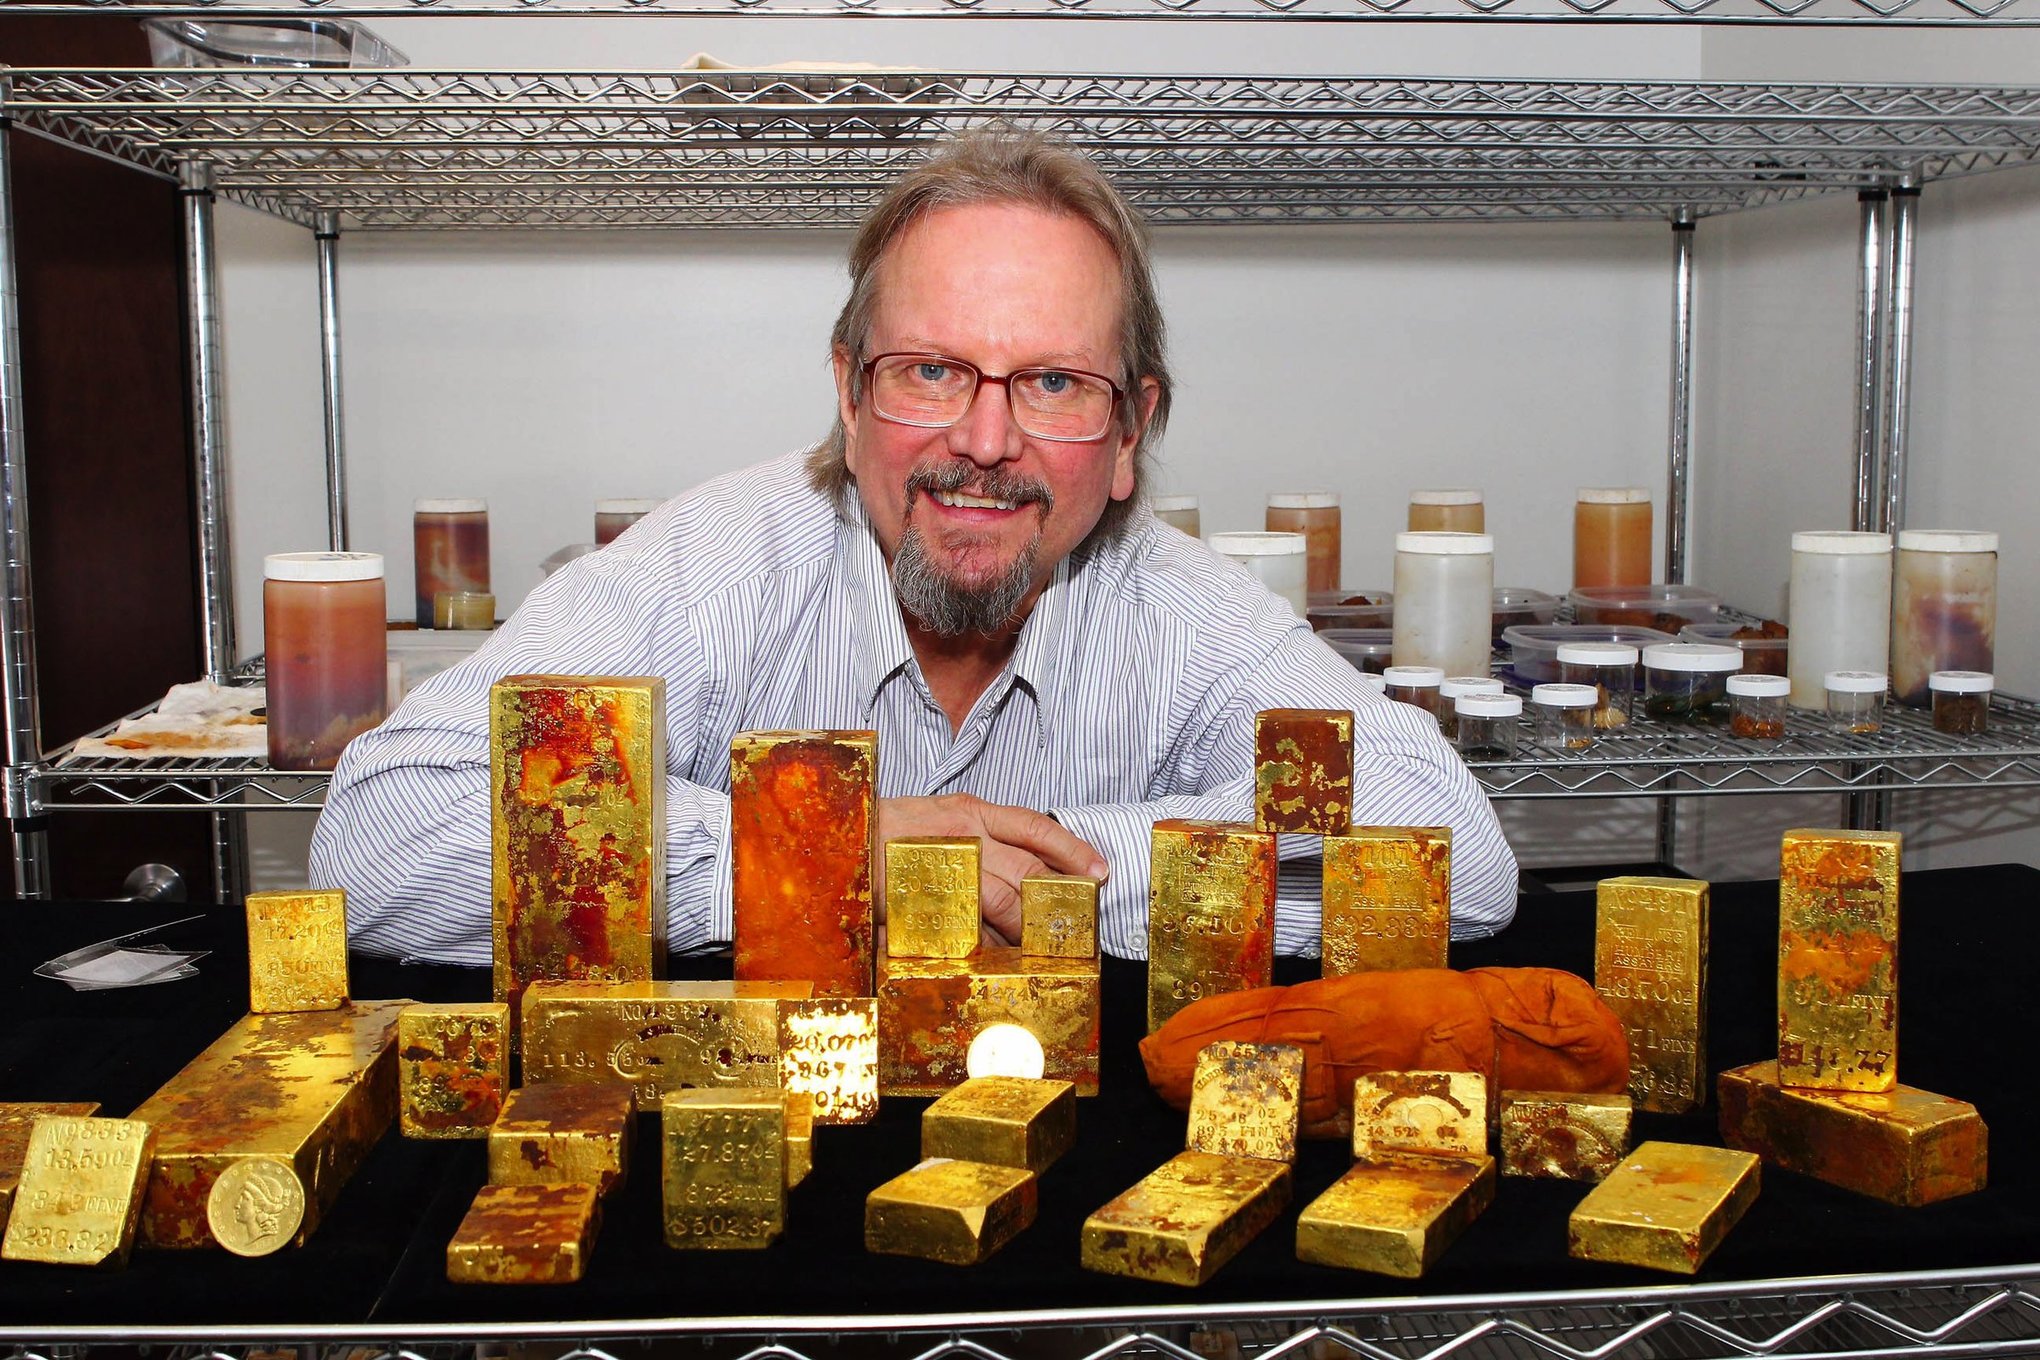 Showing off some of his loot, Bob Evans was chief scientist of the effort to recover tons of gold from the wreck of the Central America, told dramatically in Gary Kinder's book, Ship of Gold.